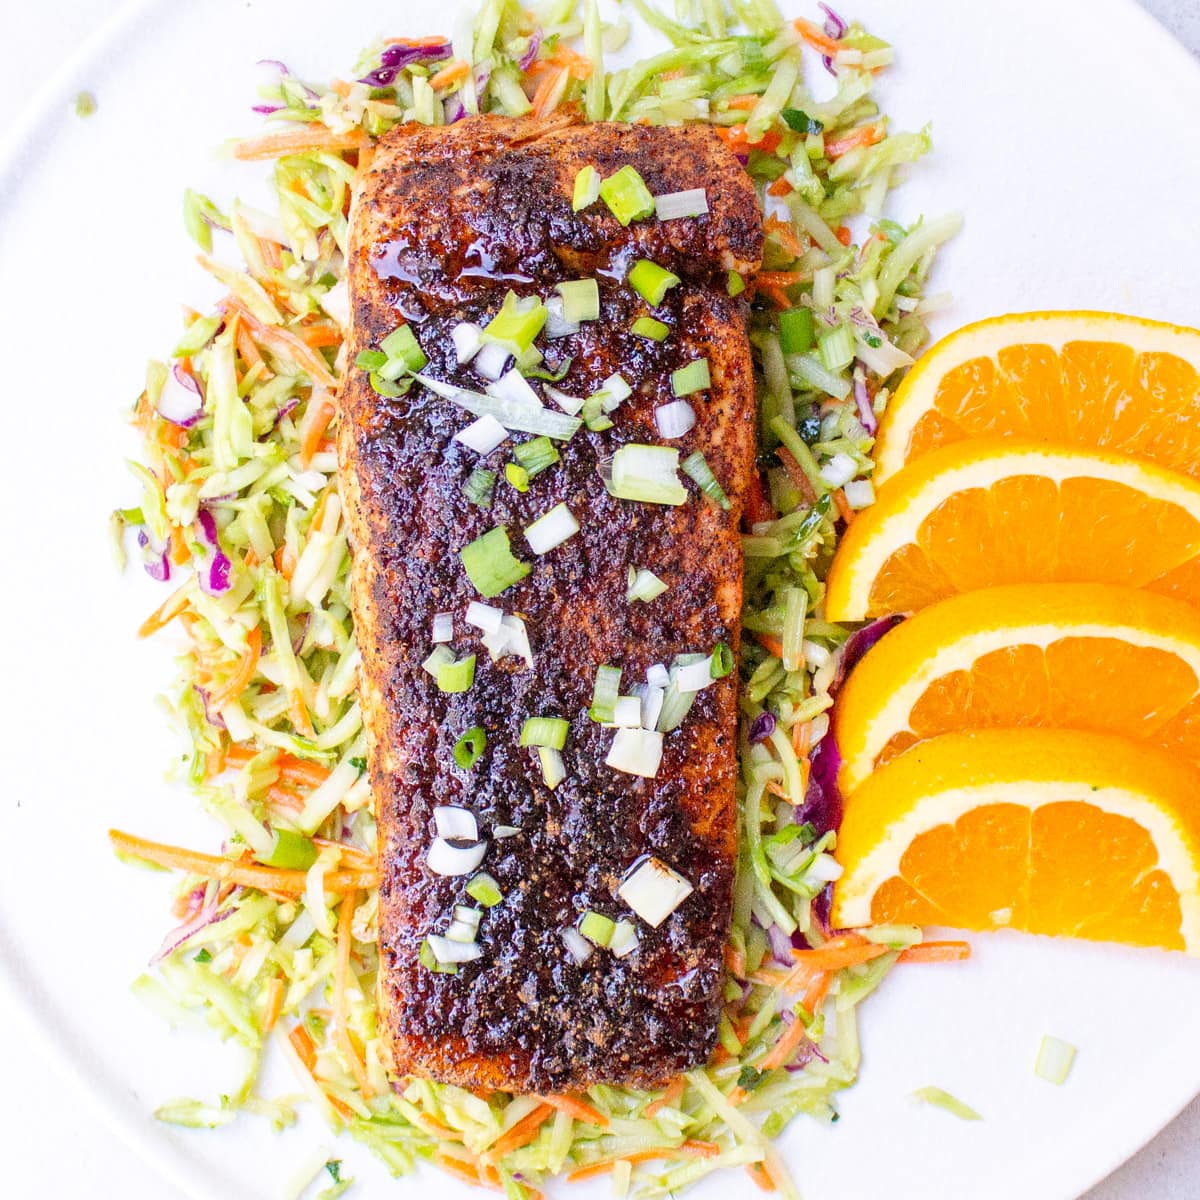 salmon fillet over coleslaw with orange slices on plate.